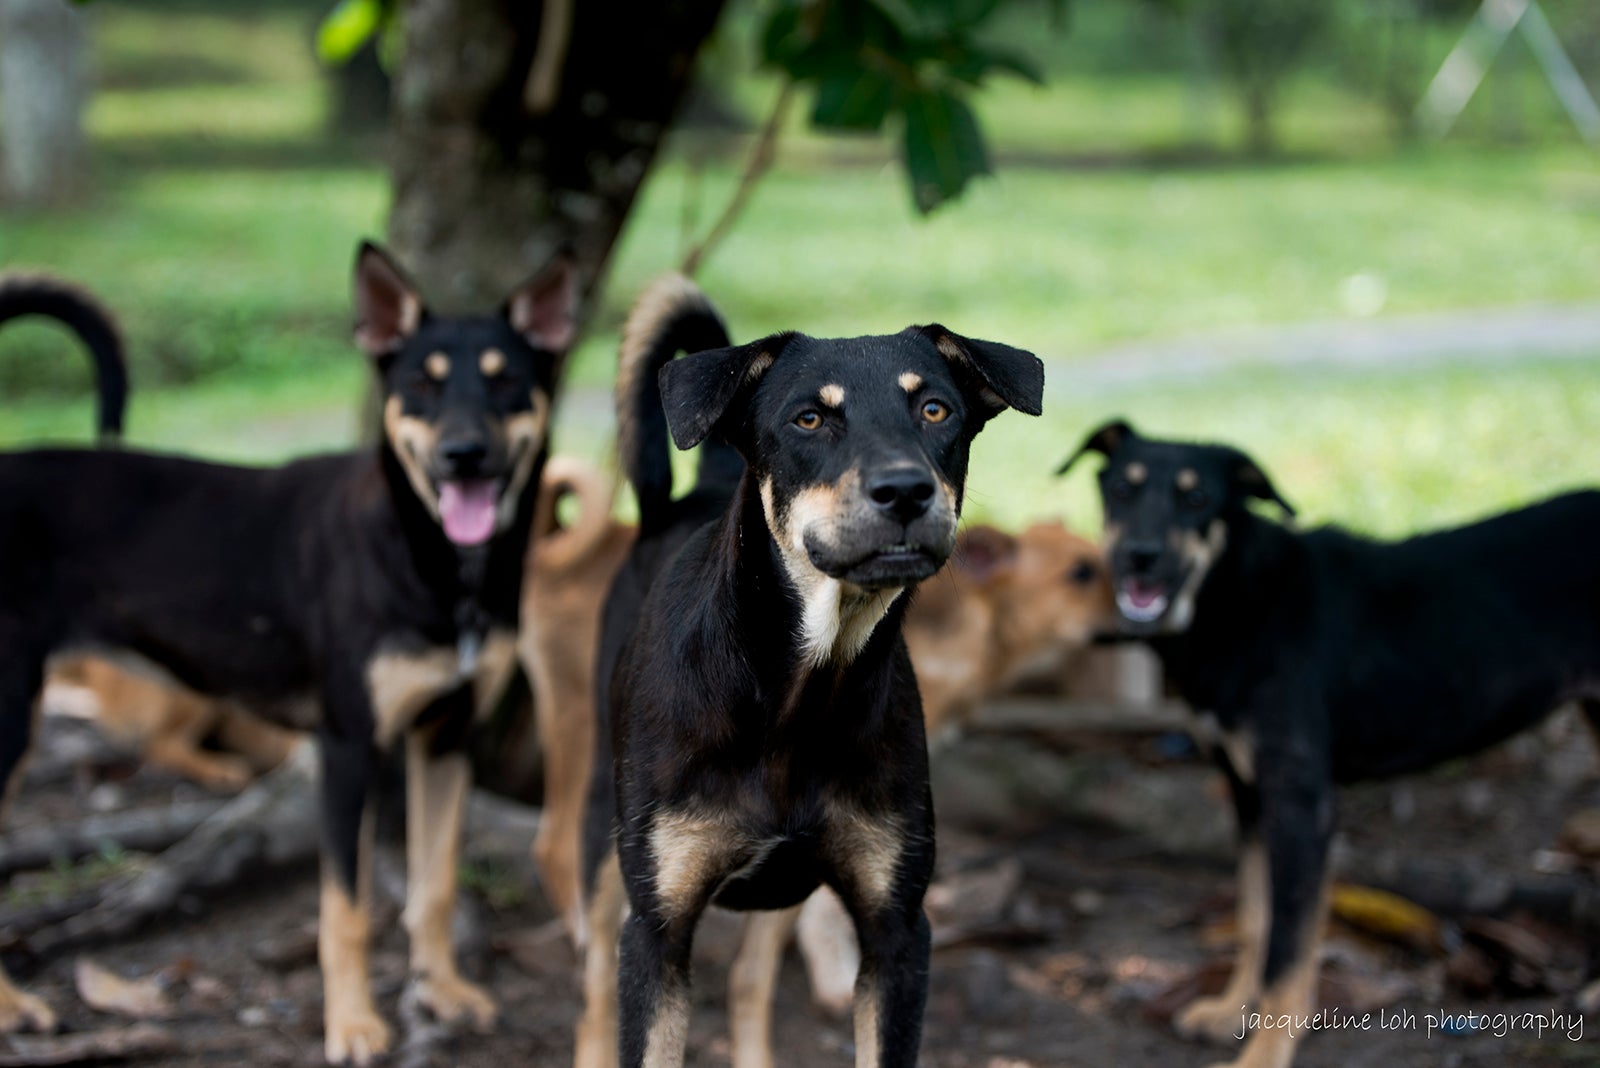 Over 30 Dogs Raised by an Old Man Poisoned to Death by Cruel People in Penang - WORLD OF BUZZ 1